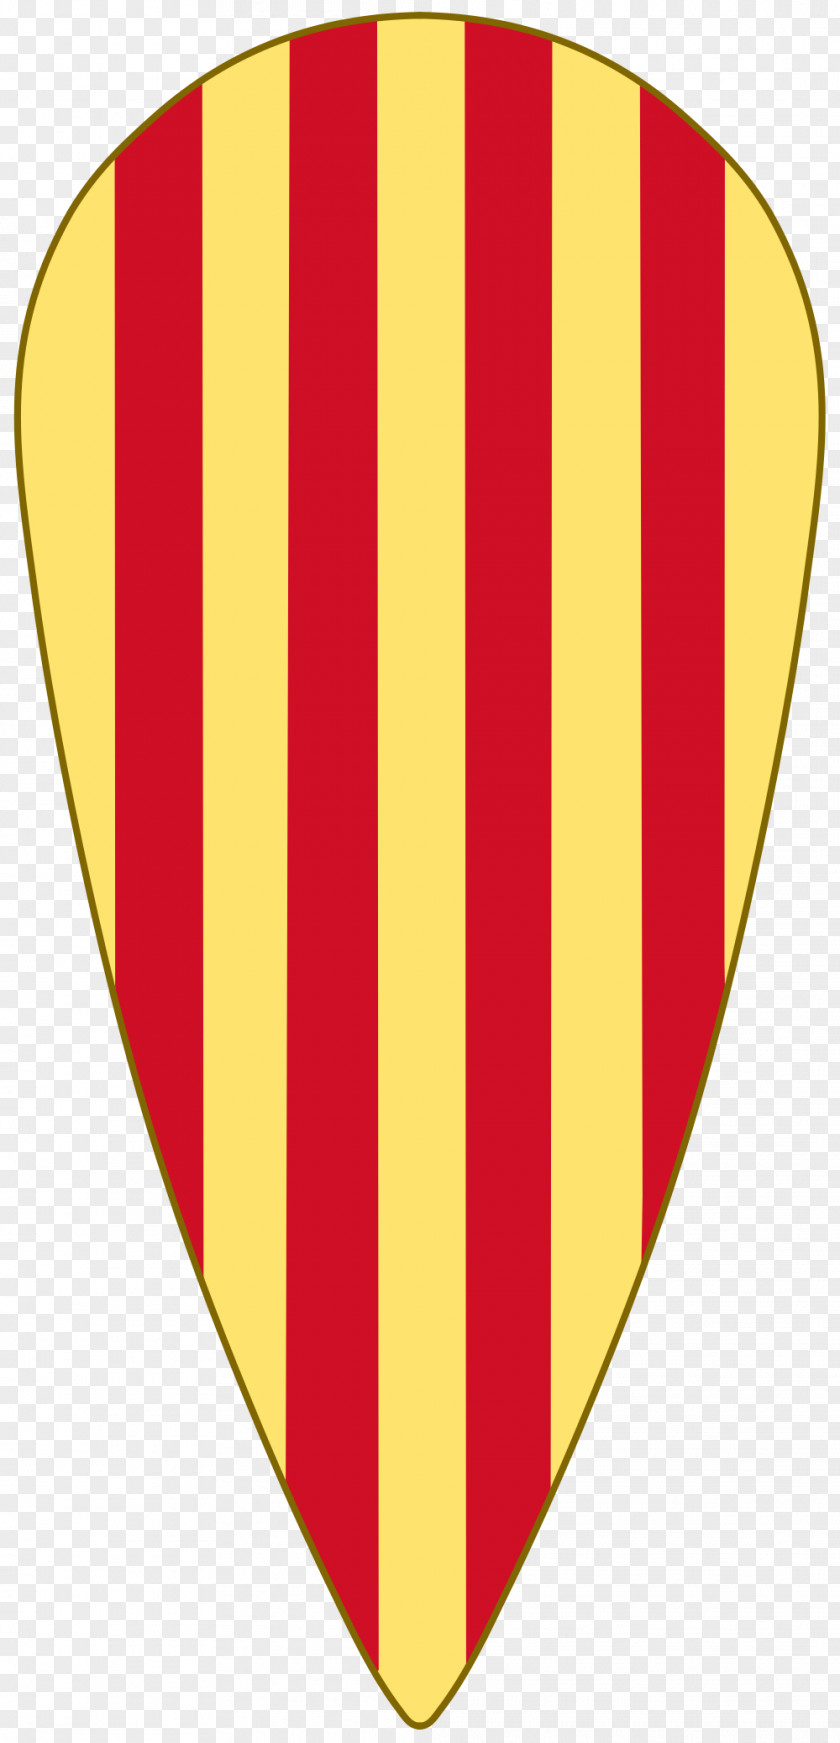 Shield County Of Barcelona Crown Aragon Kingdom Coat Arms PNG